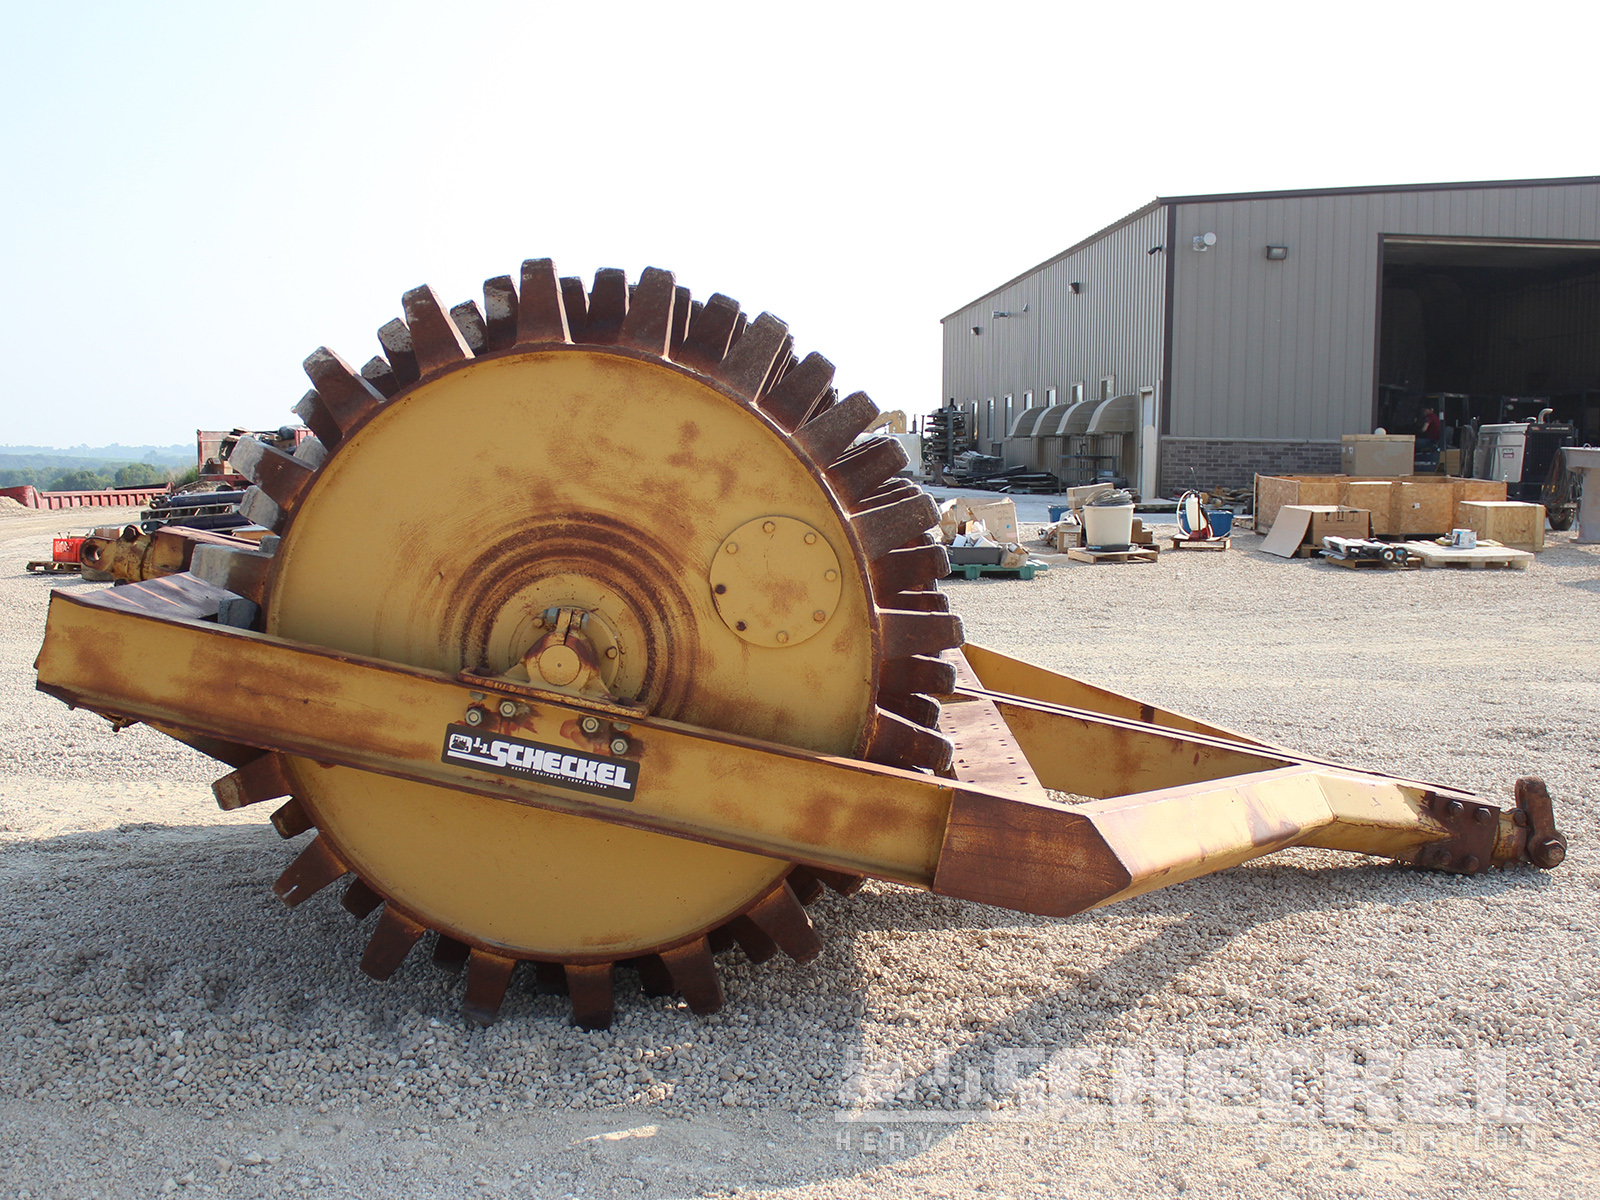 Scame Roller-Block 450 SC92066 industrial cable reel. stand and drum